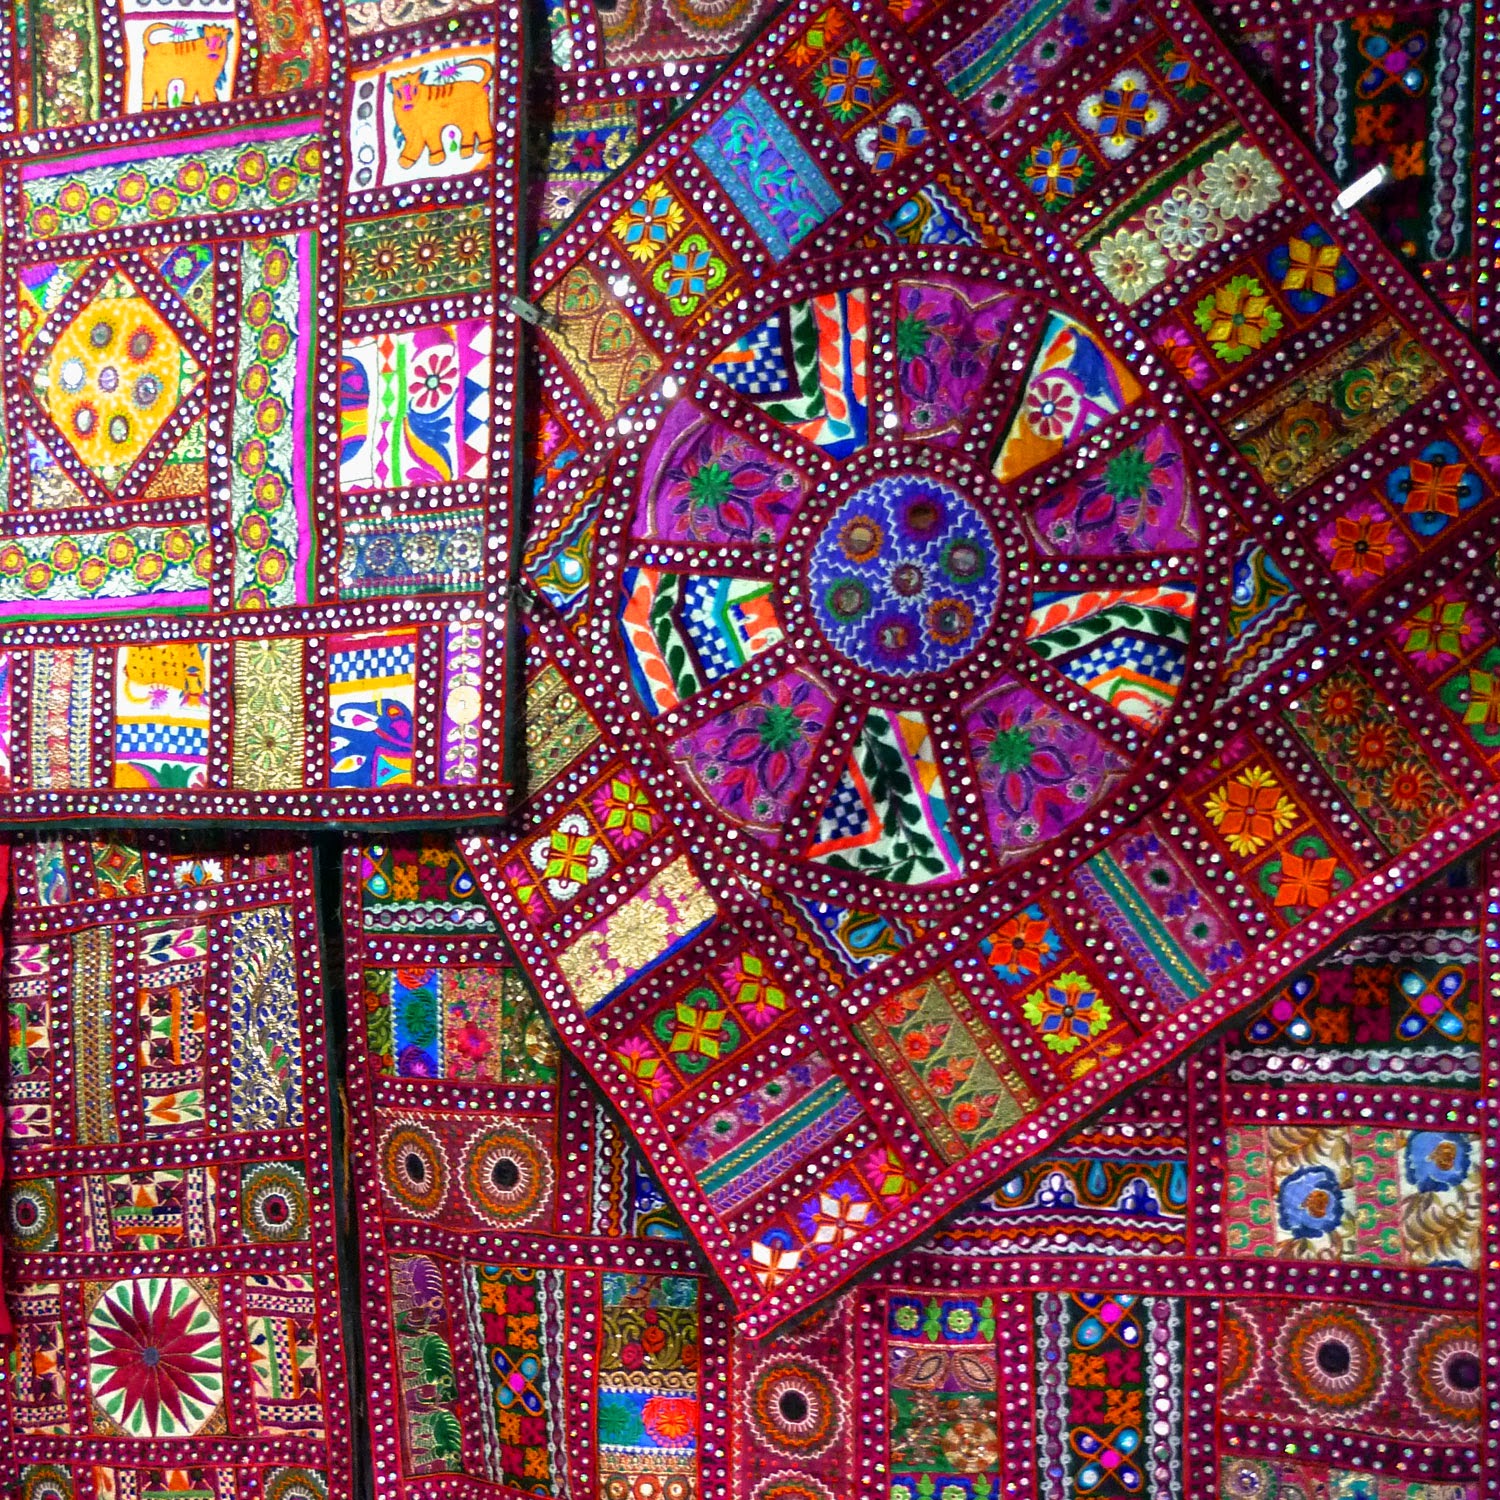 Embroidered Gujarati quilts